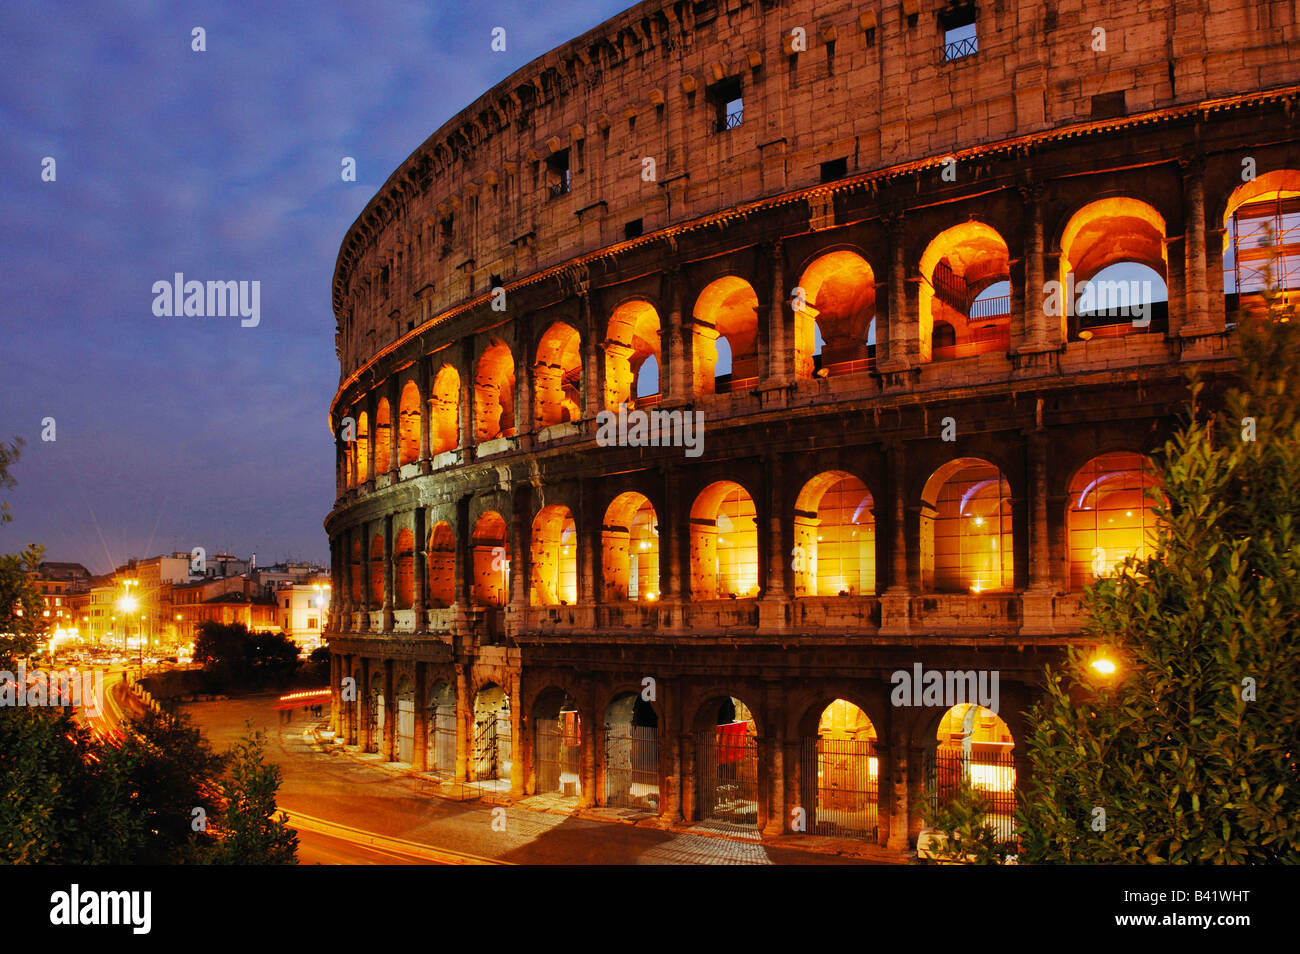 Exterior view of the Colosseum at night Rome Italy Europe Stock Photo